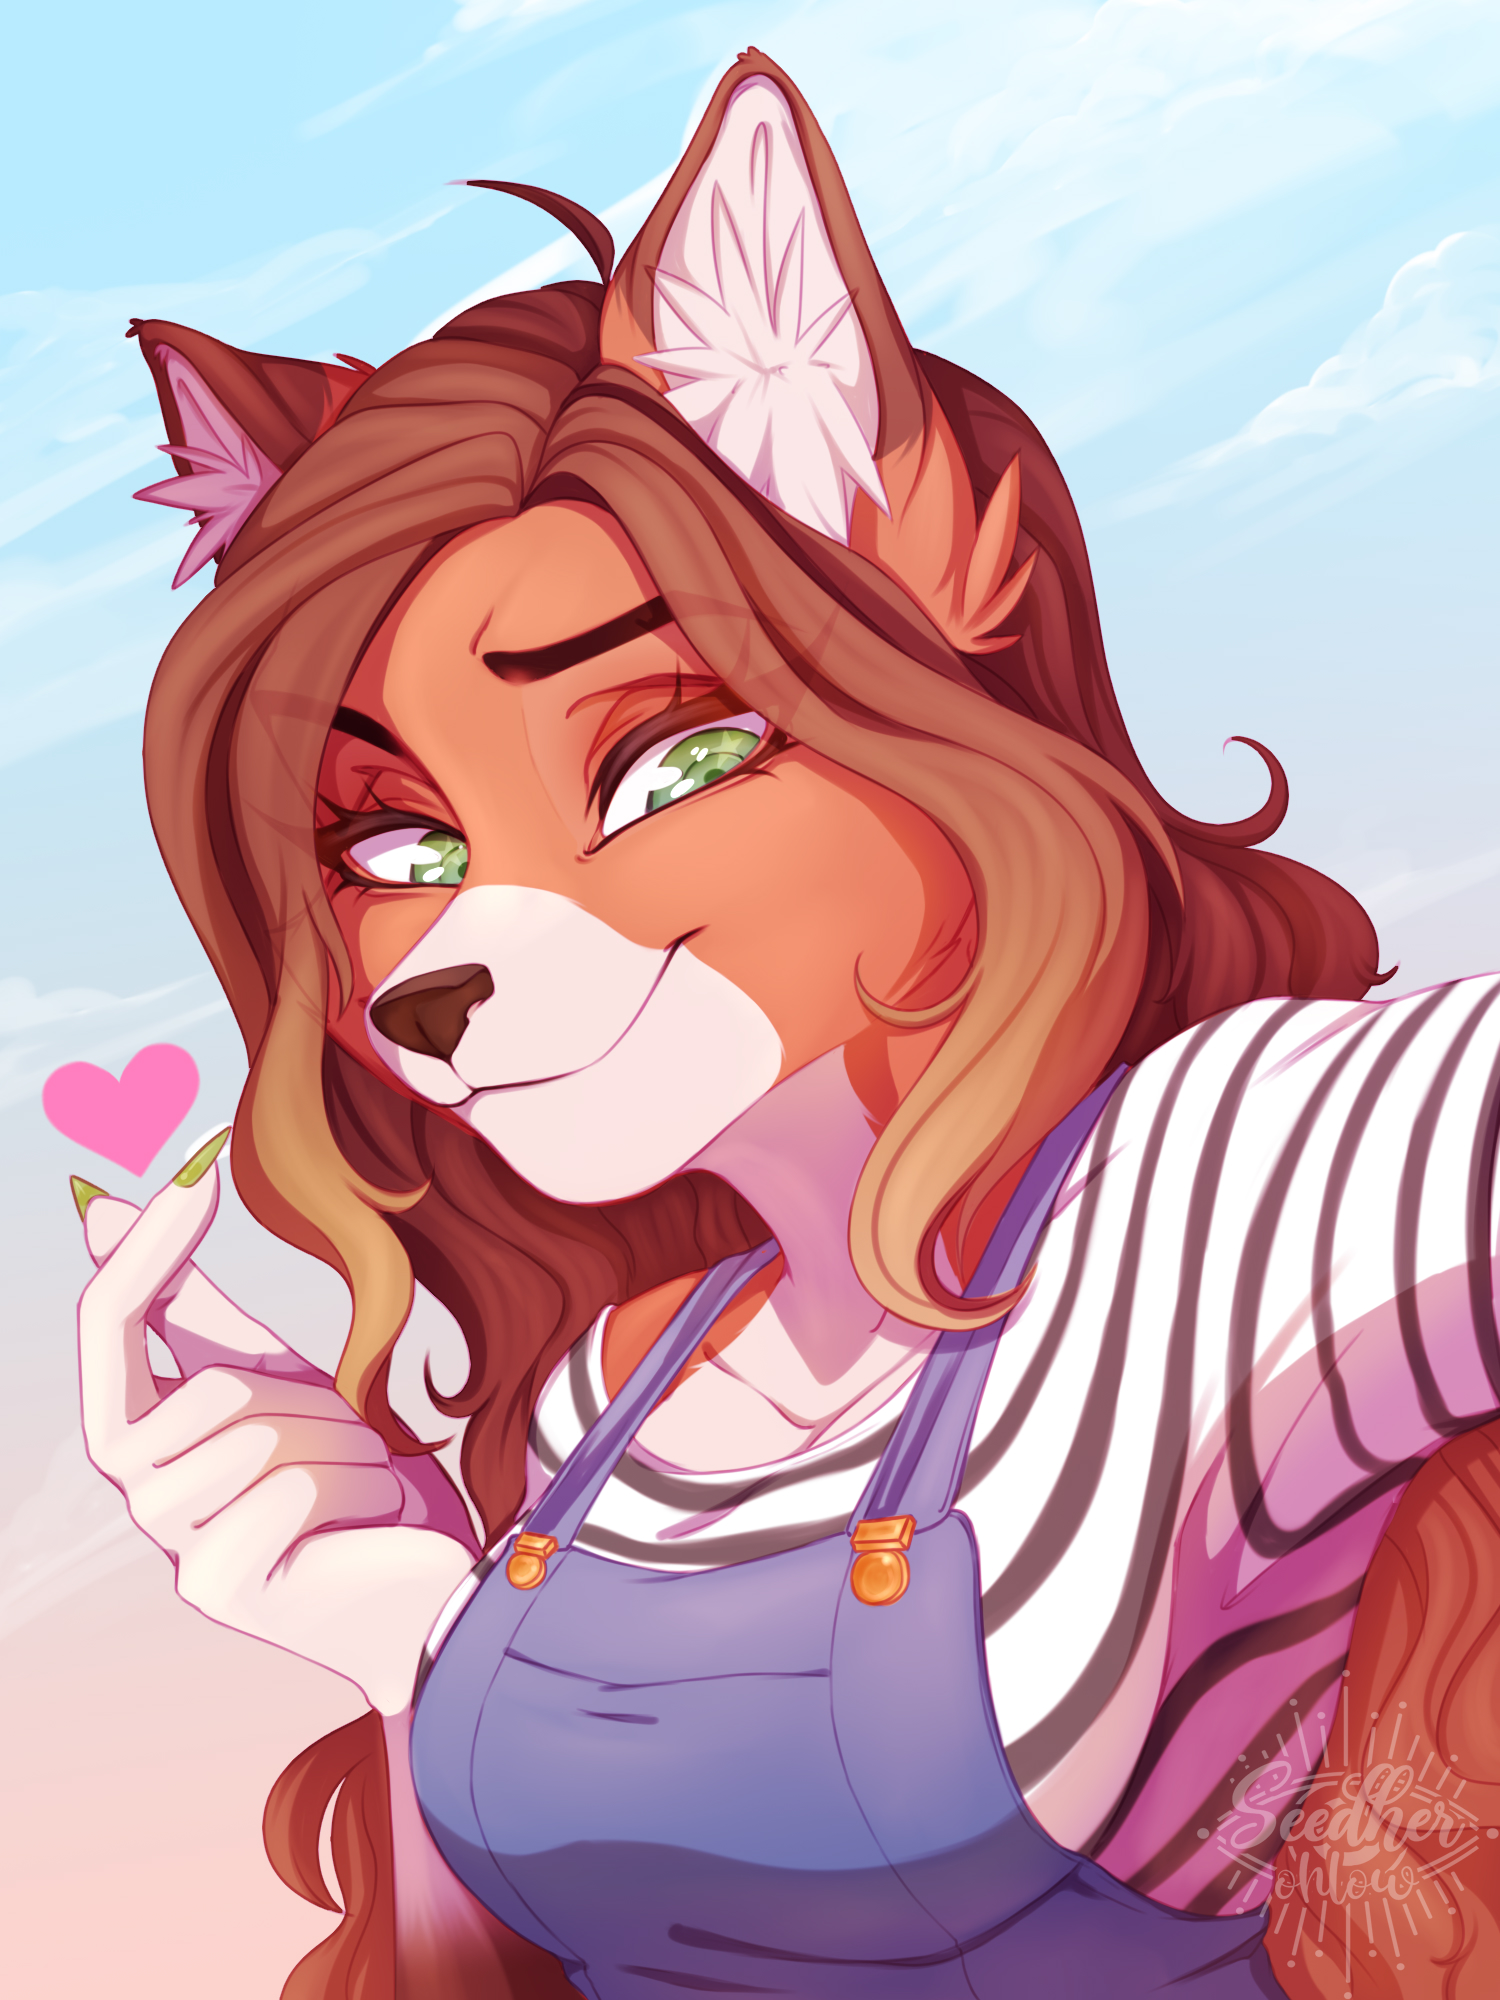 Furry Commission Fox Girl By Seedher On Deviantart 